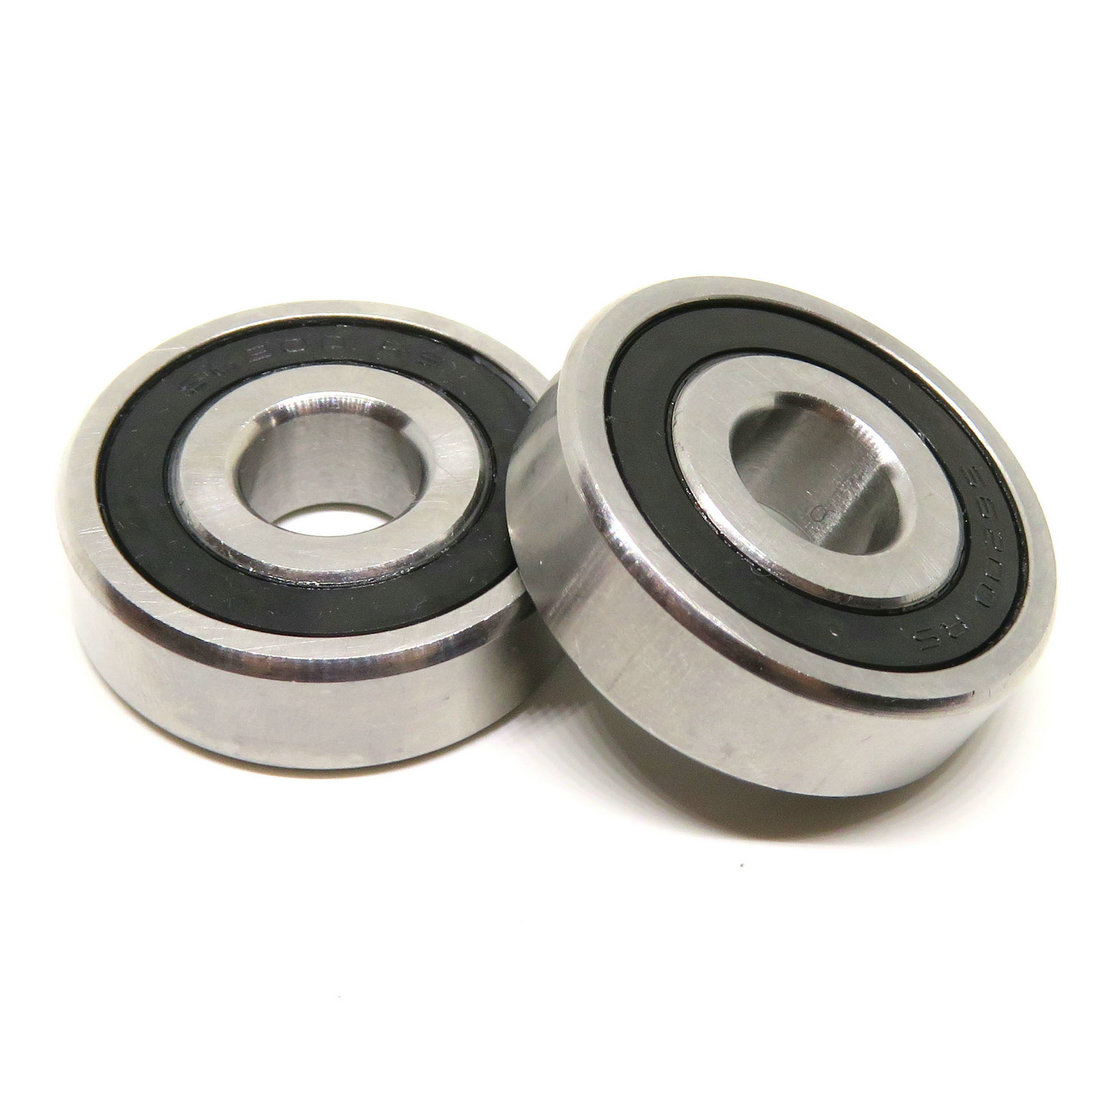 Washing Machines S6200RS 10x30x9mm 440C Stainless Steel S6200-2RS ABEC-3 Rubber Sealed Bearing